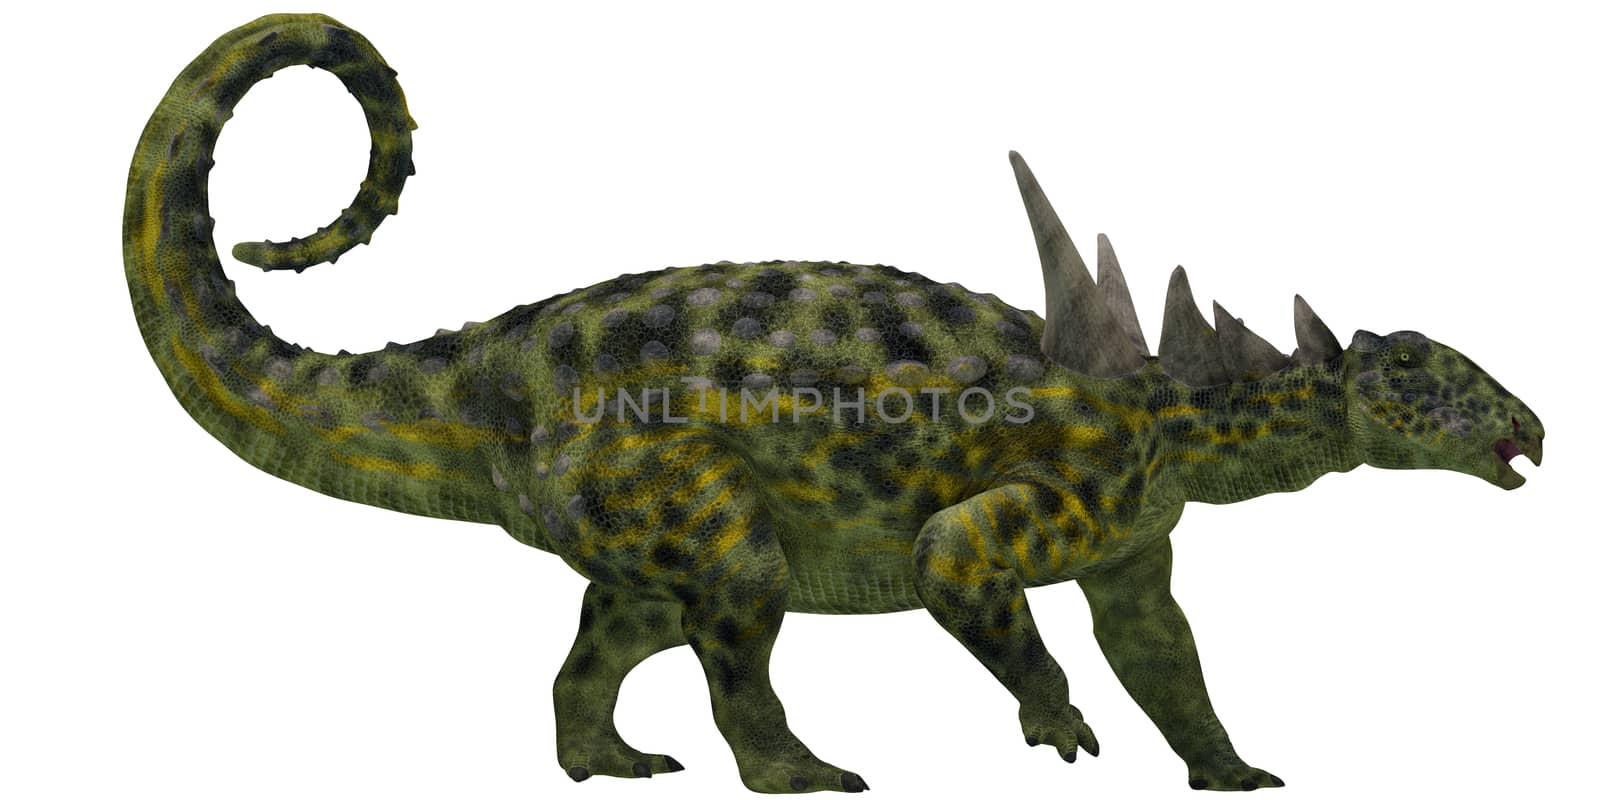 Sauropelta was heavily armored dinosaur from the Cretaceous Period of North America.